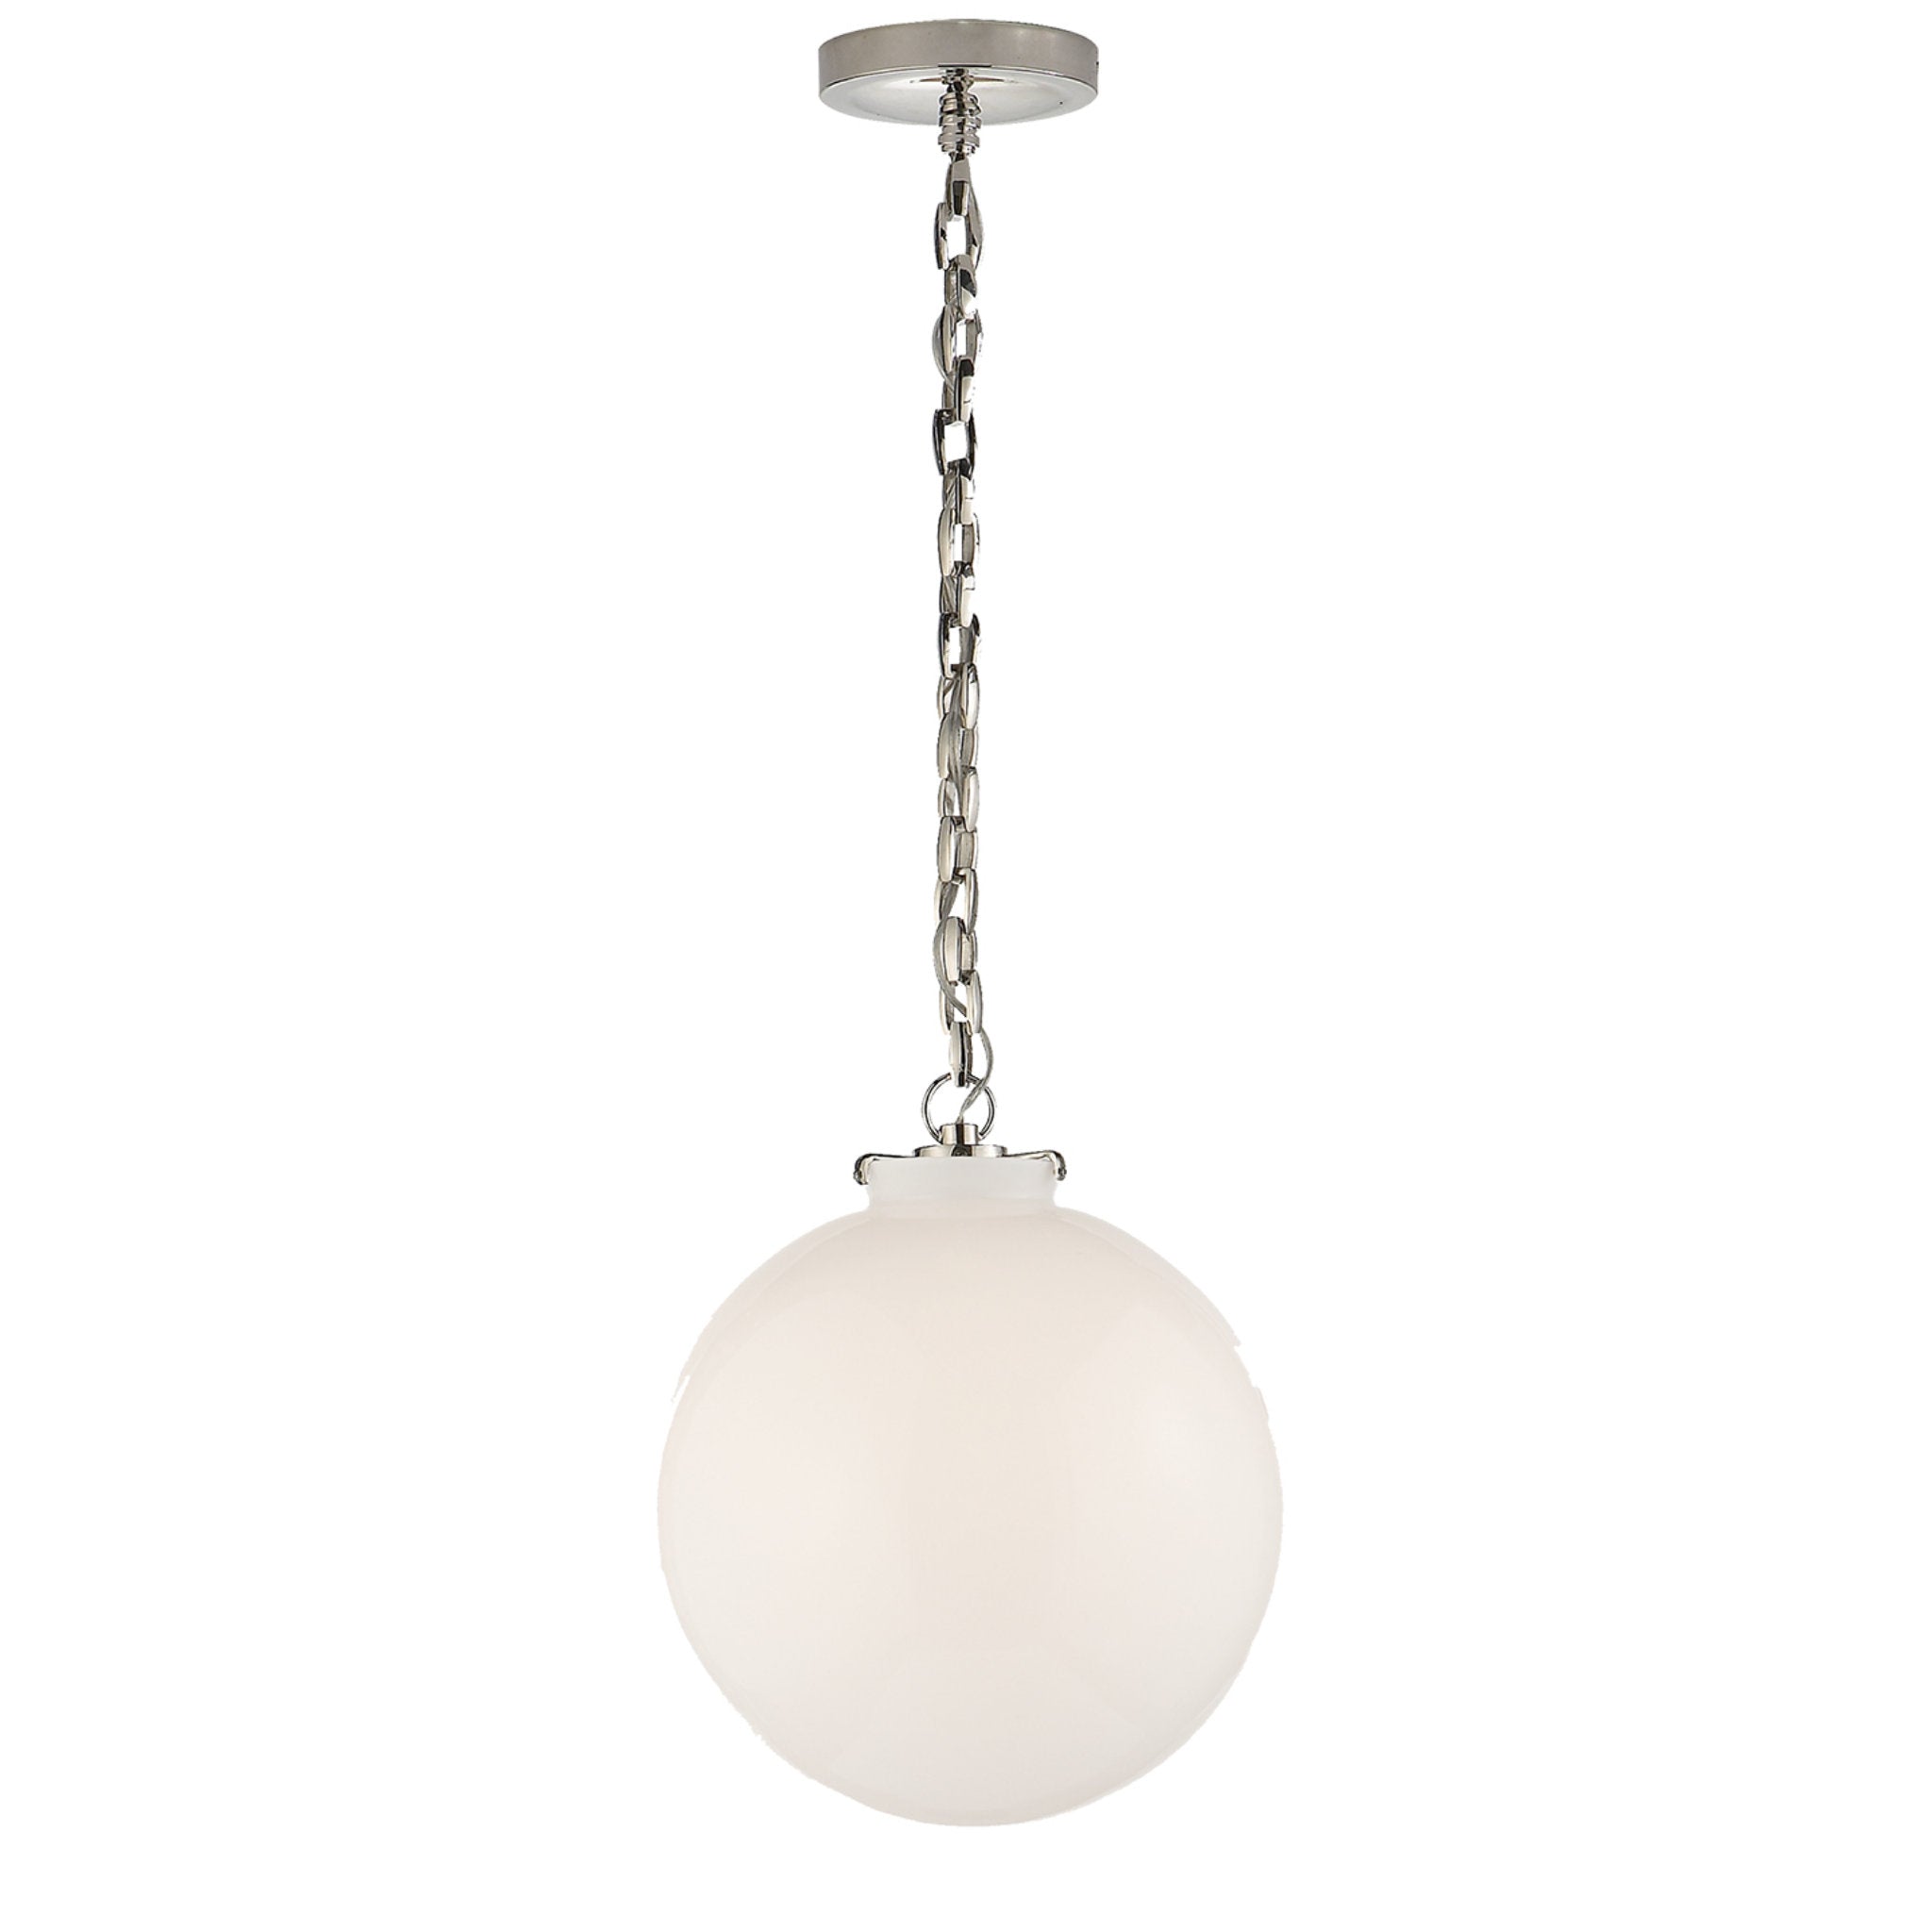 Thomas O'Brien Katie Globe Pendant in Polished Nickel with White Glass